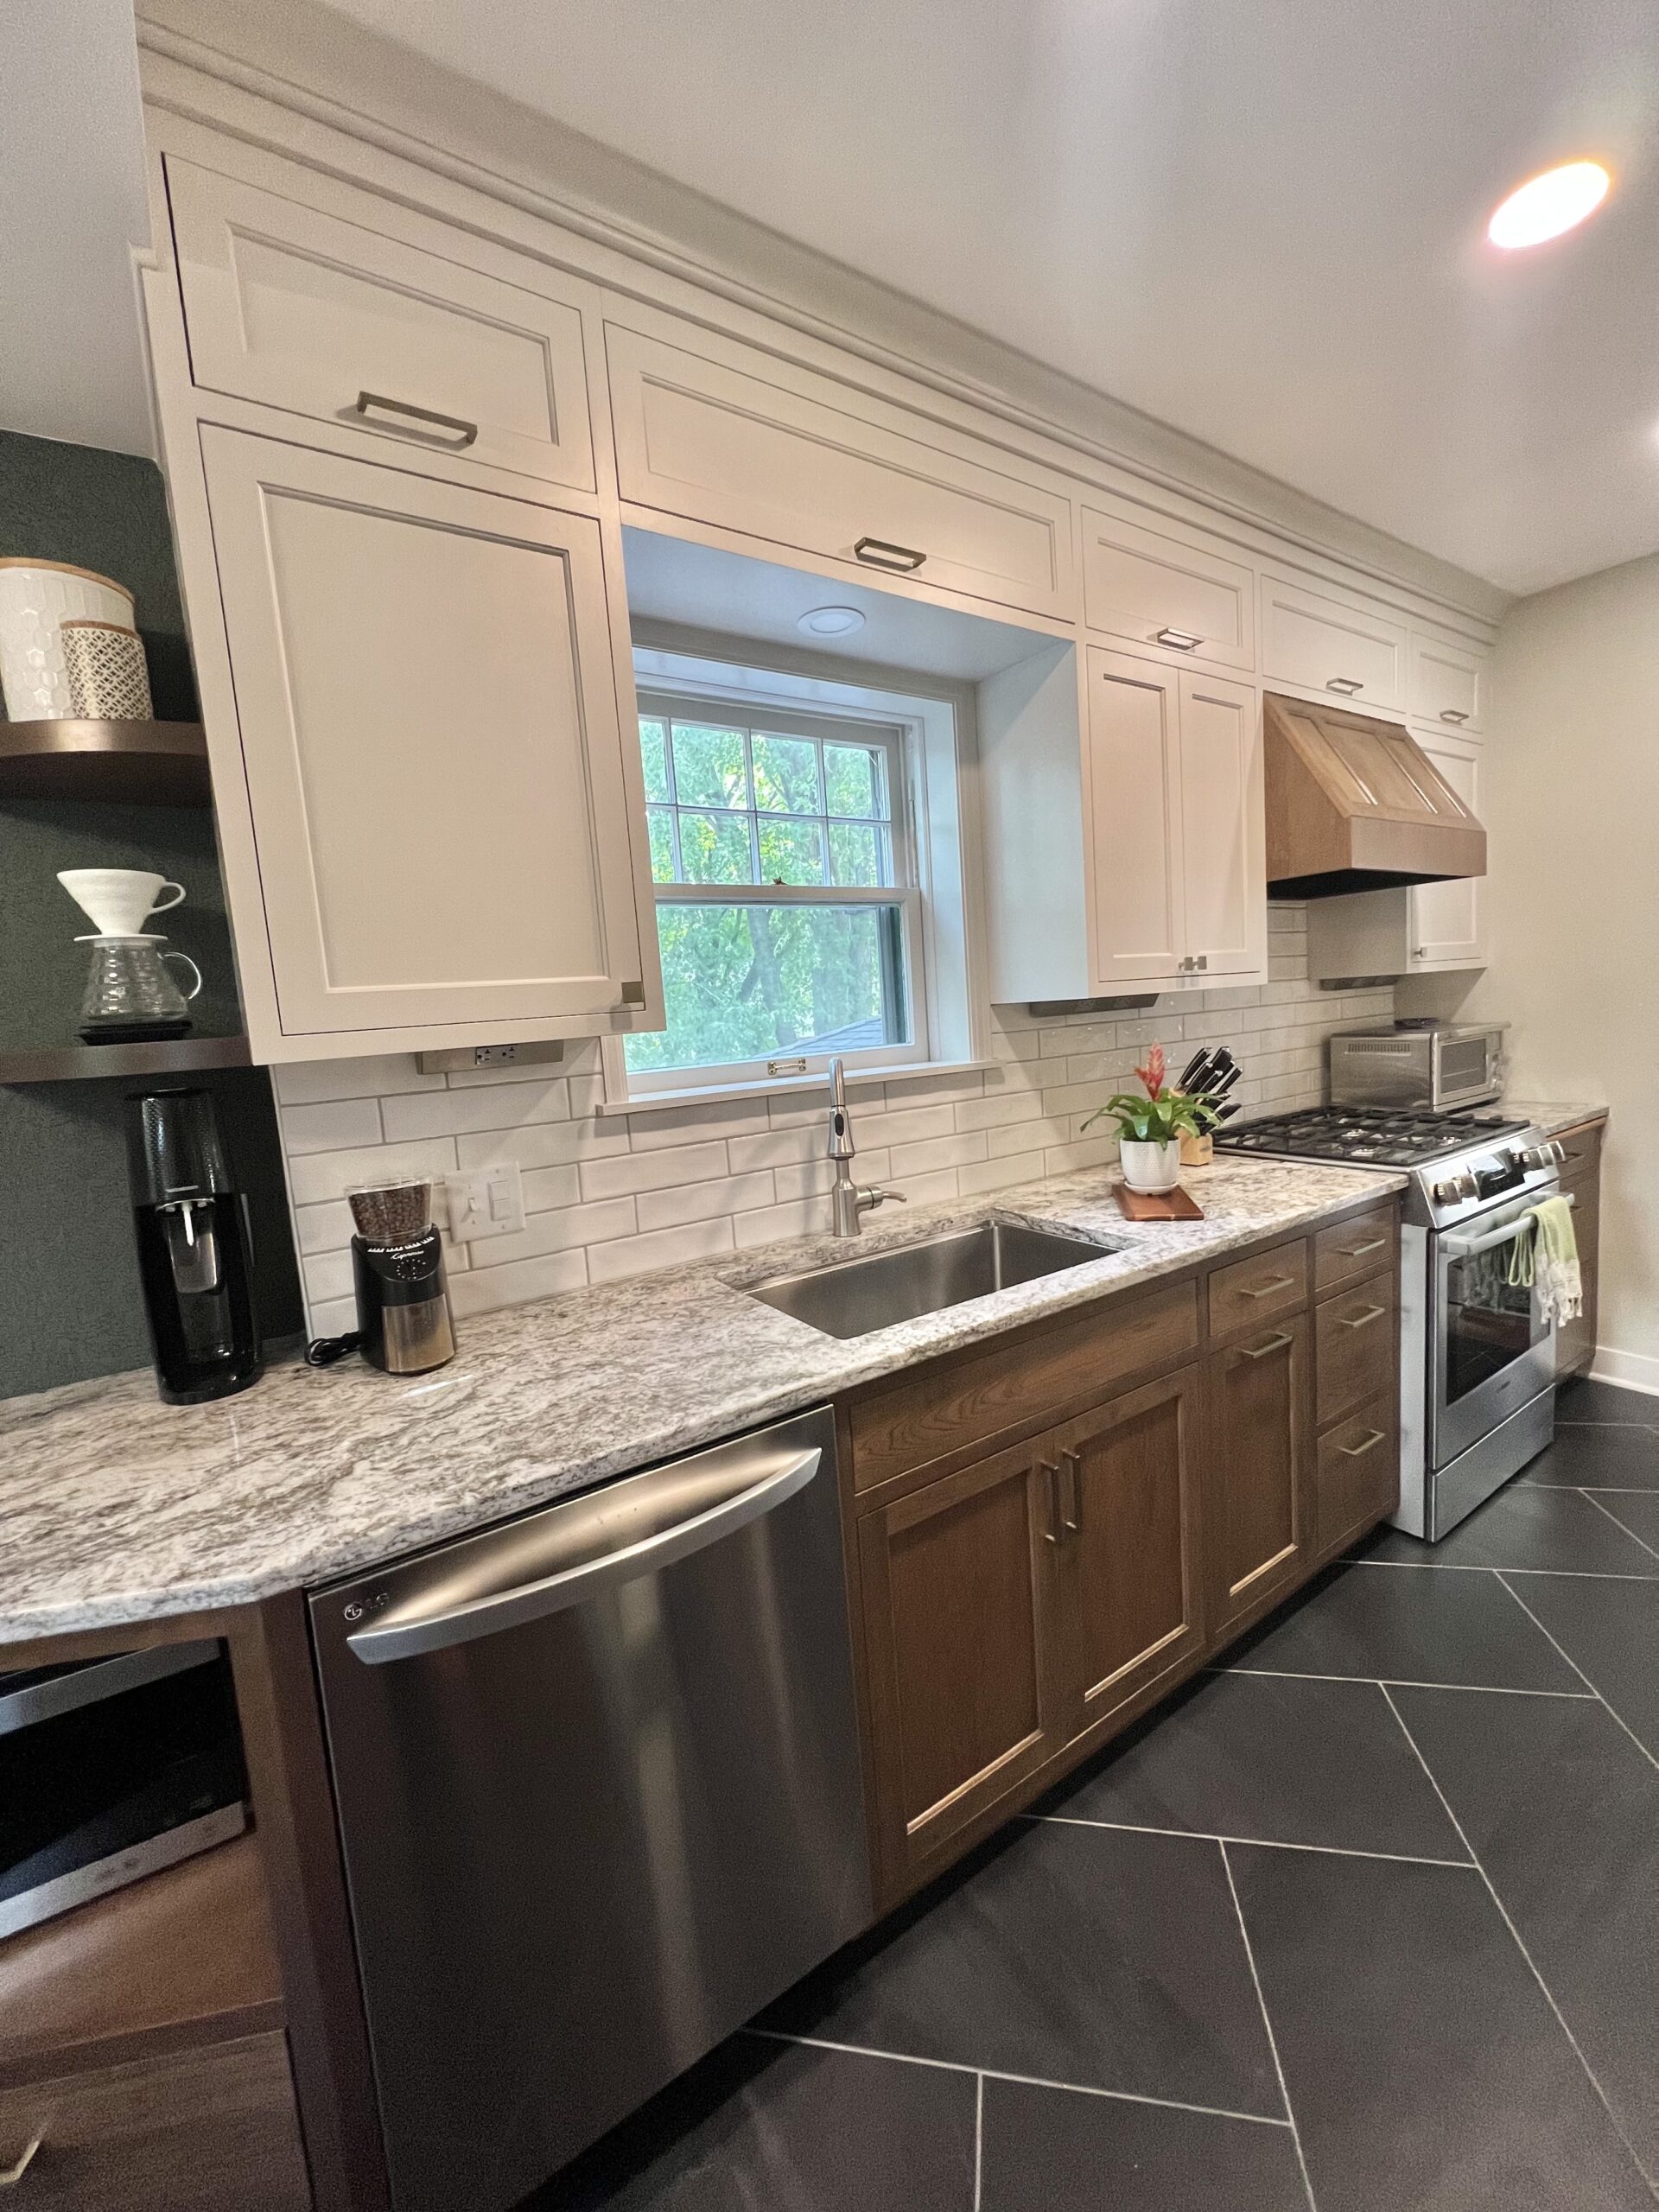 Galley kitchen - view of sink, countertops, dishwasher, range, microwave, and cabinets